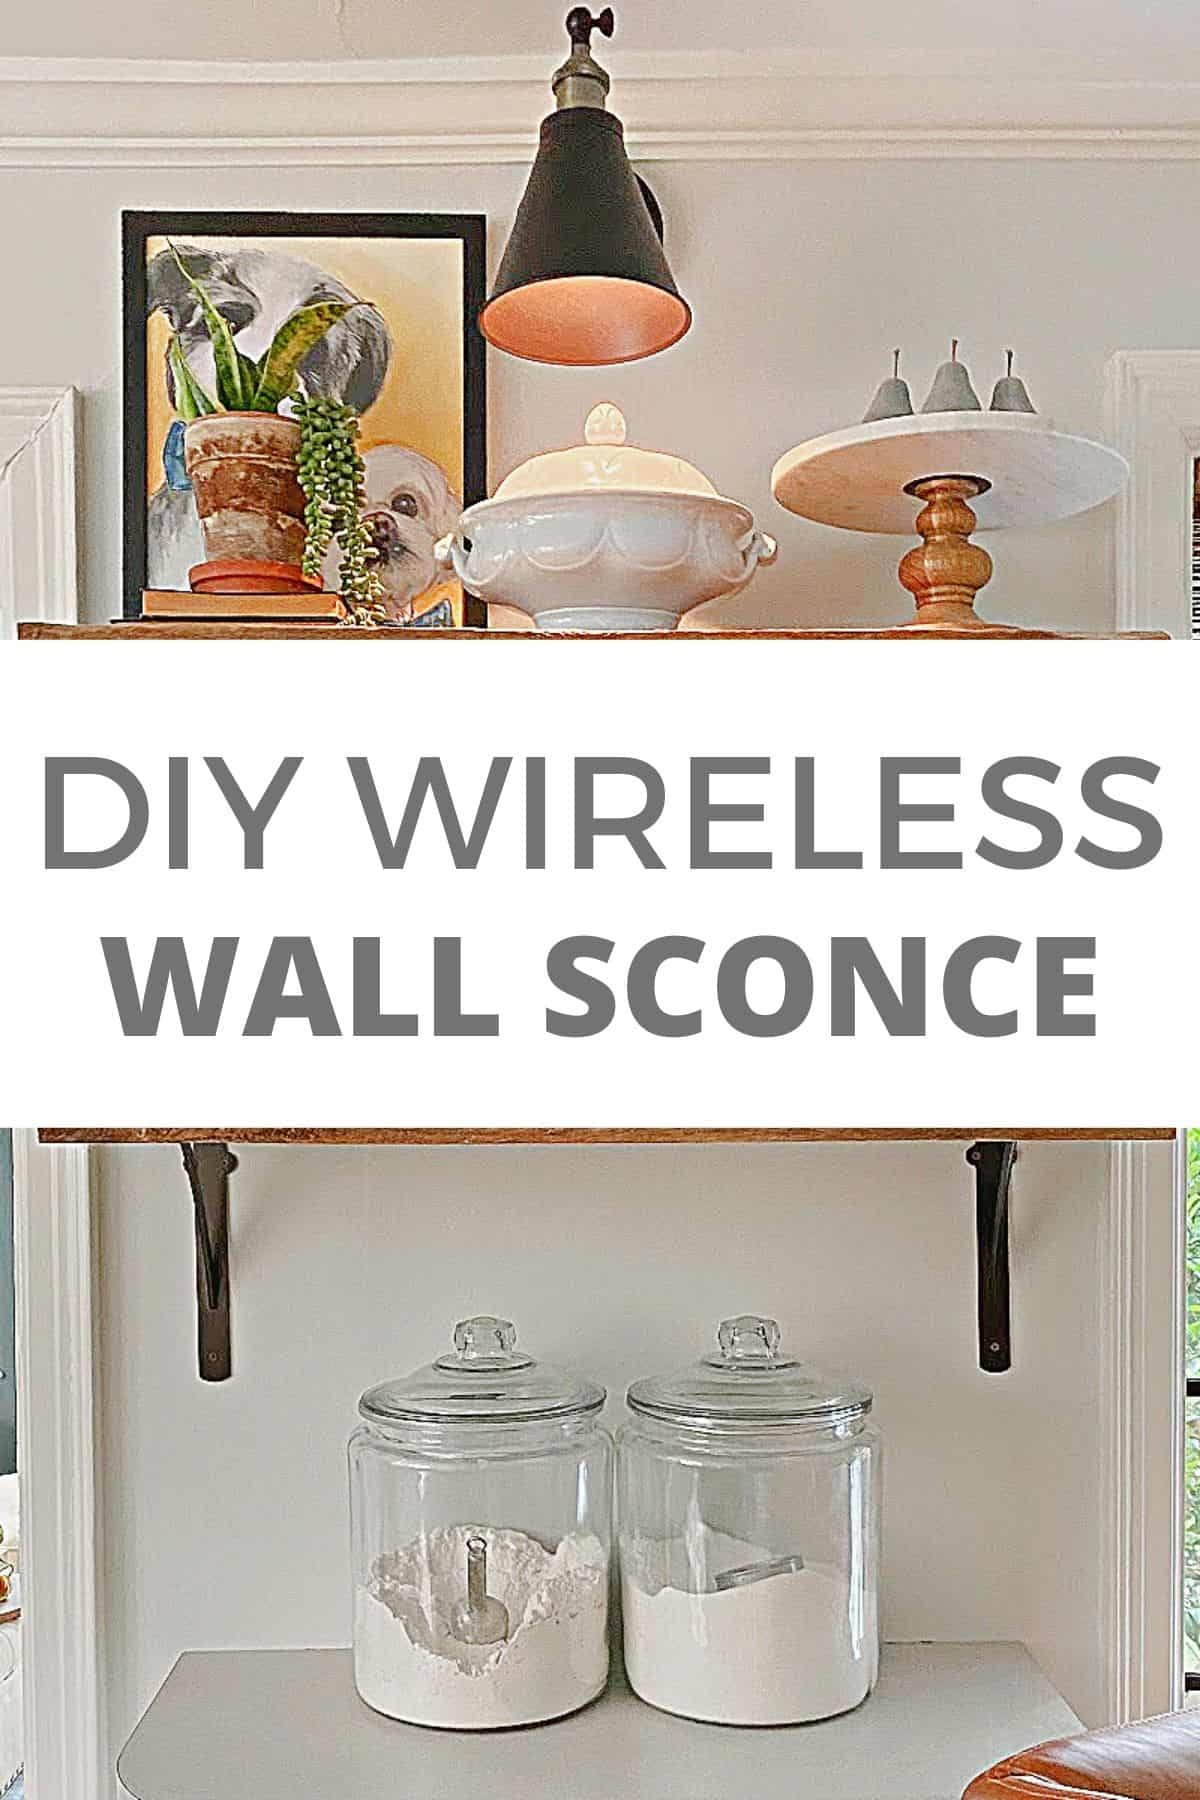 DIY wireless wall sconce hanging over kitchen shelves and large pinterest graphic